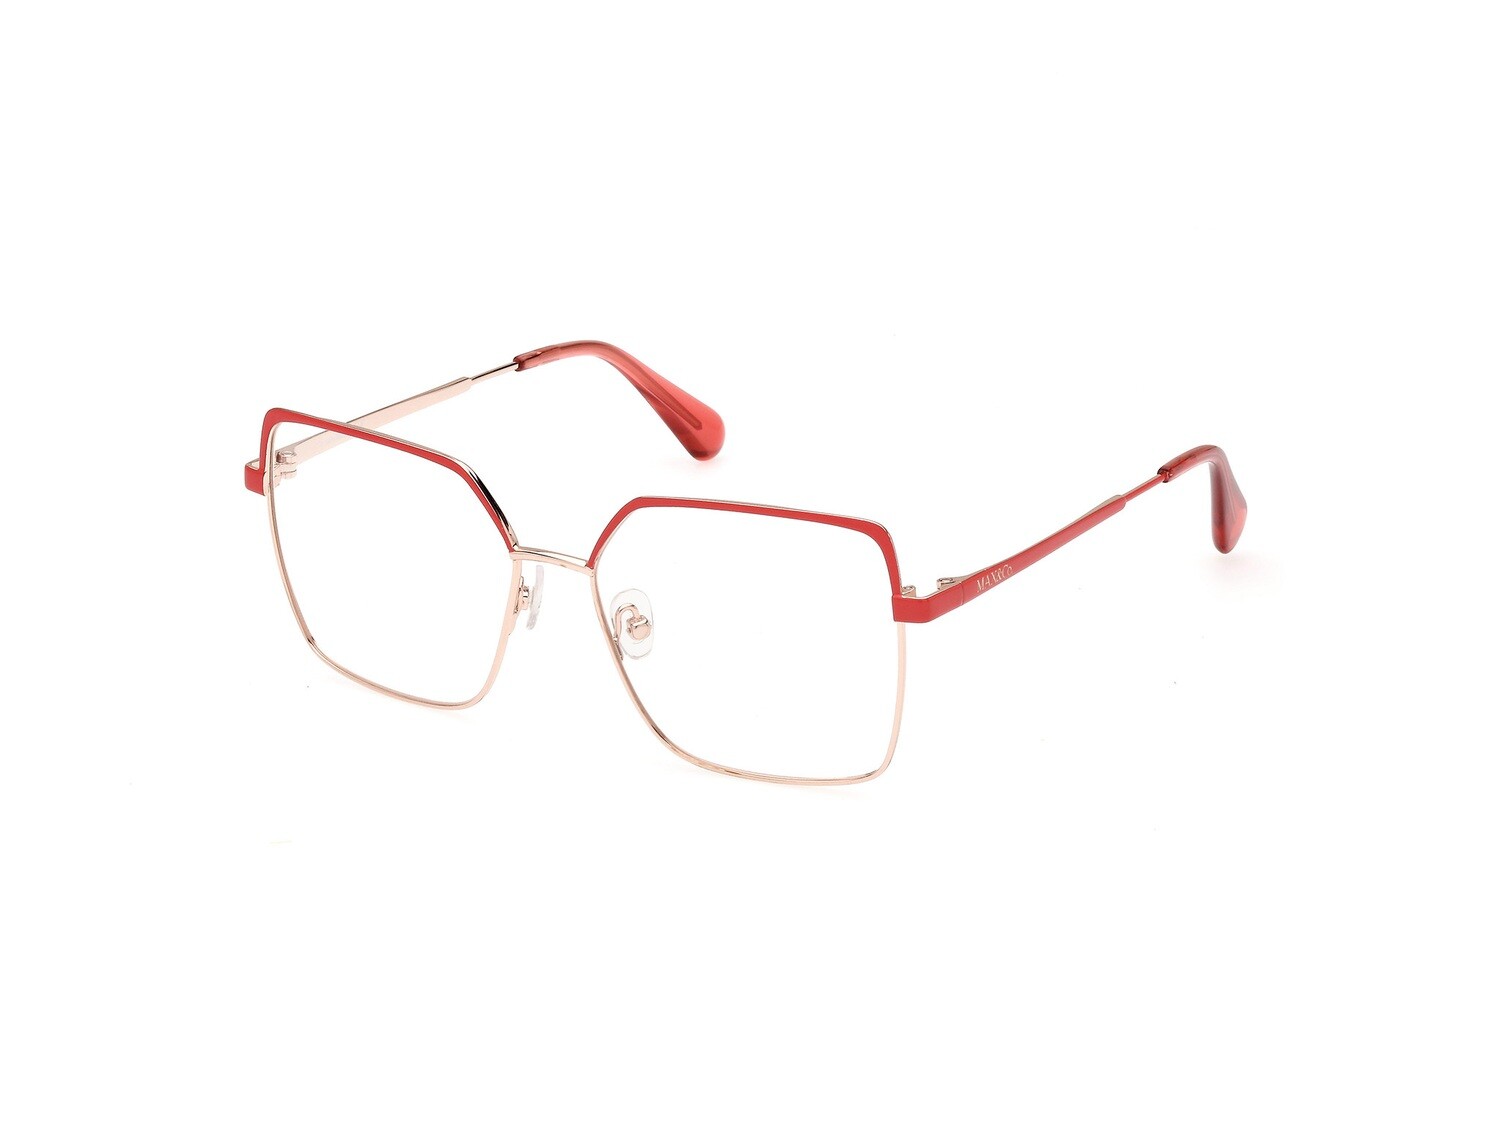 MAX & CO MO5097/V 028 rose gold - coral pink occhiali